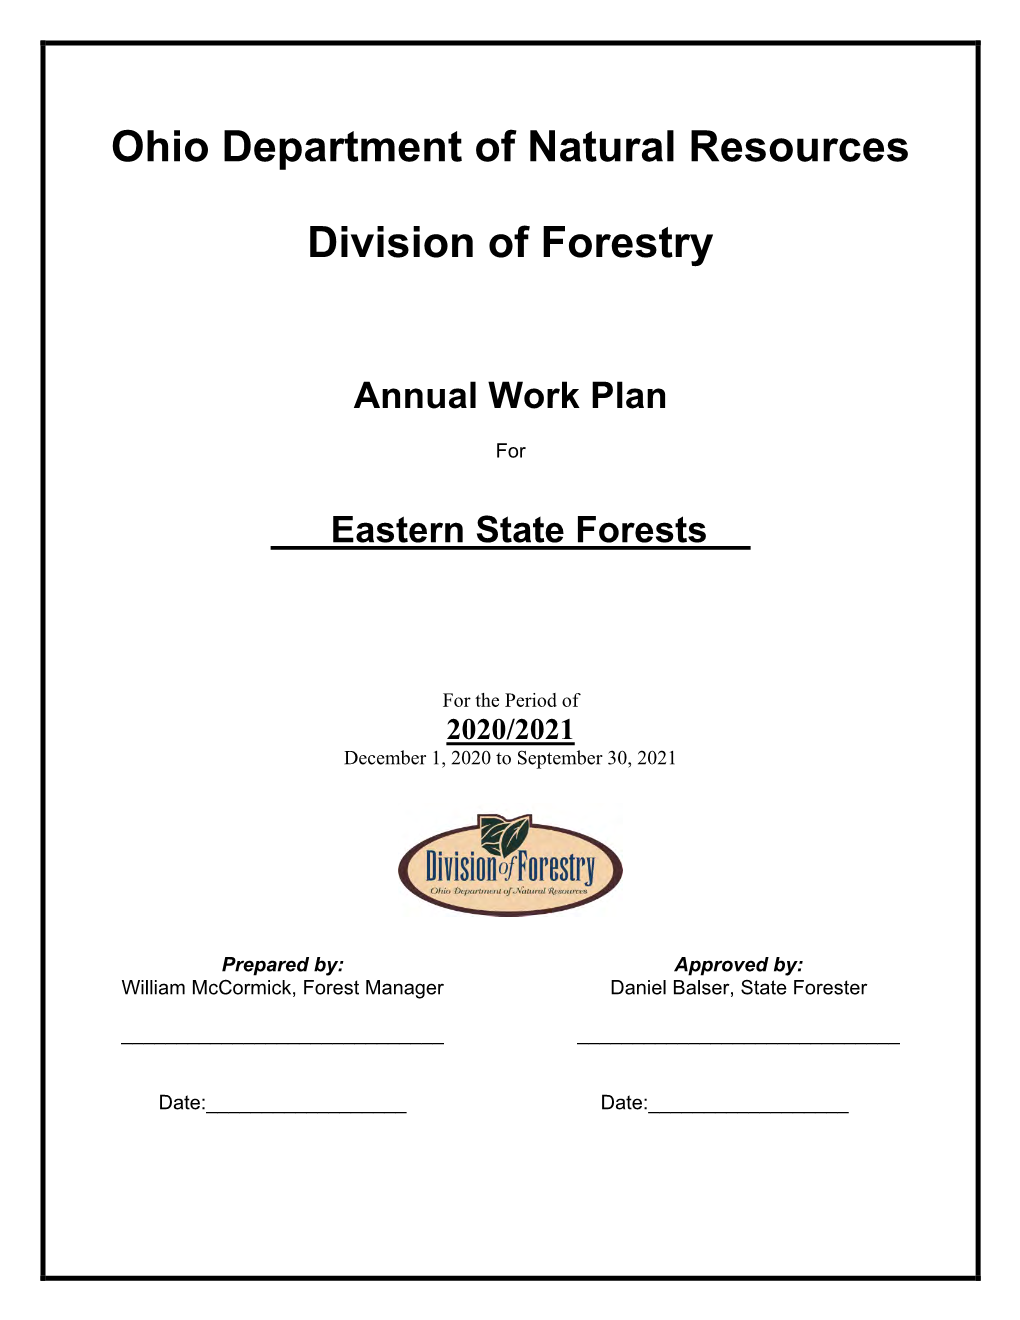 Ohio Department of Natural Resources Division of Forestry